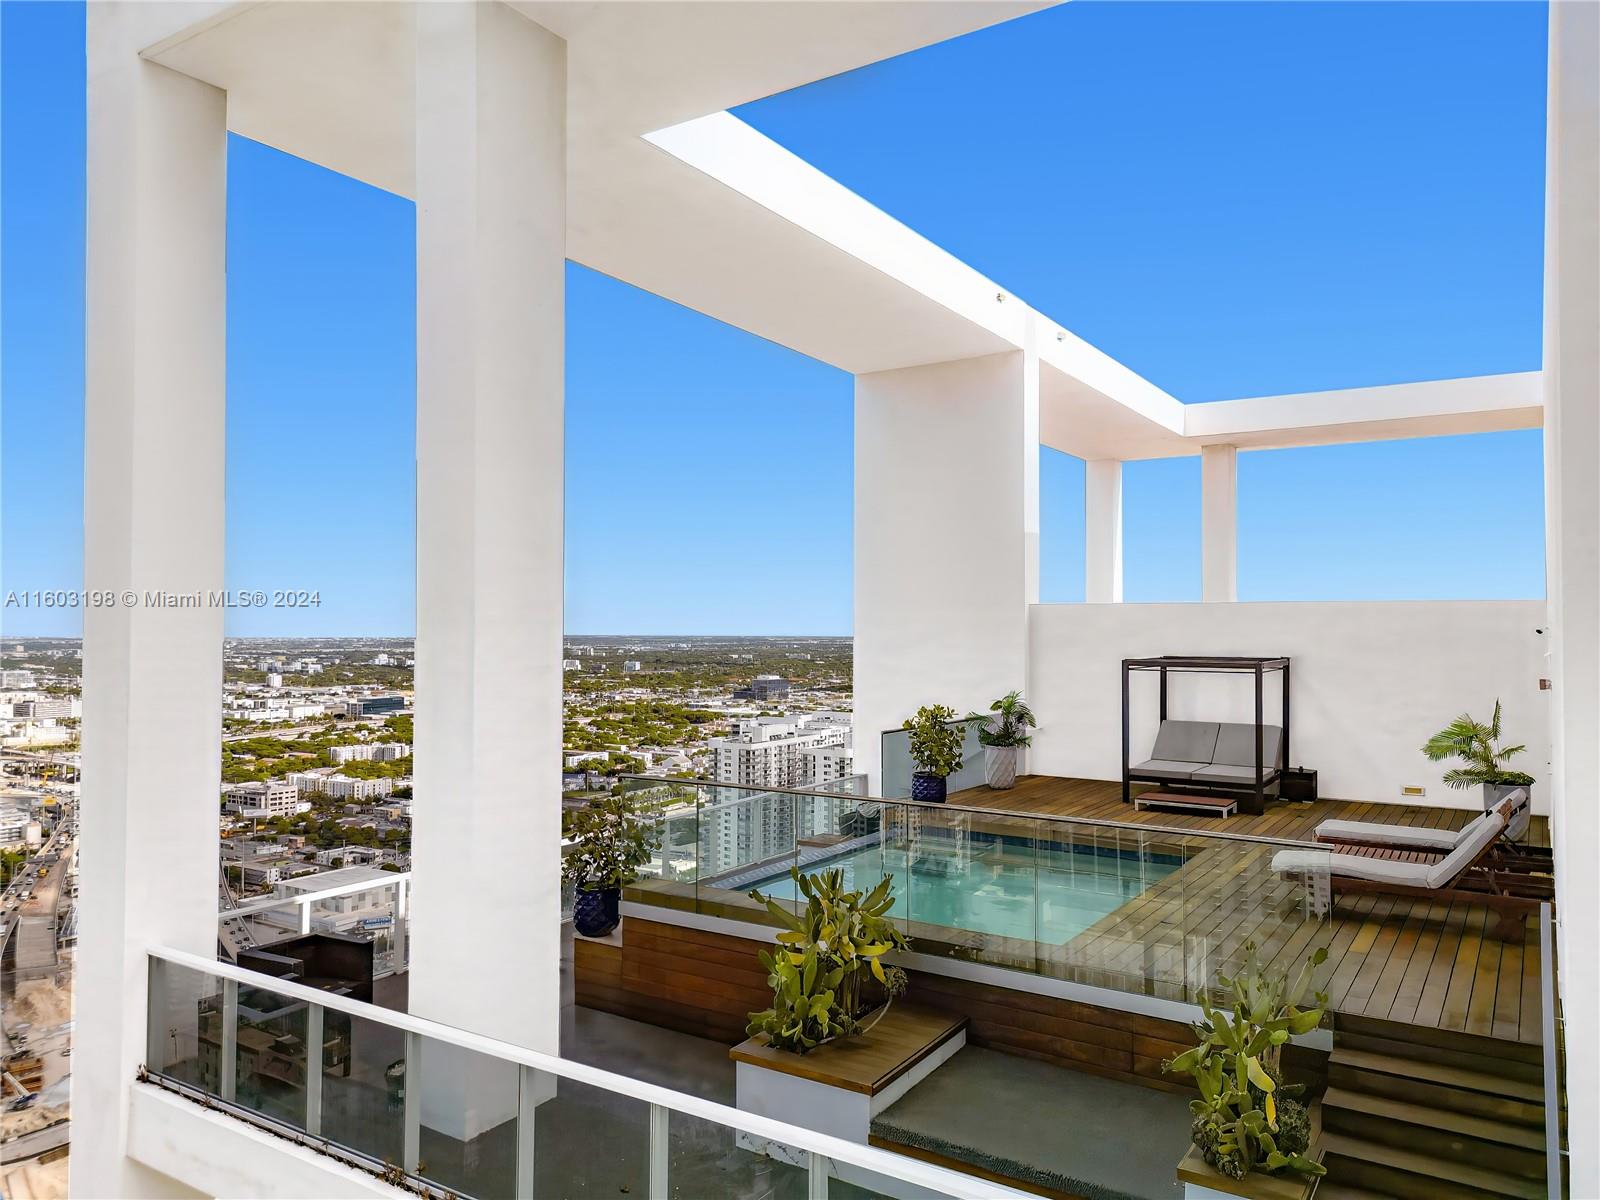 Immerse yourself in breathtaking 180-degree vistas from this sleek 2,681 square foot, three-level penthouse haven. Elevate your lifestyle in this fully renovated 2 bedroom + den with soaring 20-foot ceilings that redefine luxury, while the spa-inspired steam shower offers a serene escape. Step onto the sprawling 1,700 square foot private rooftop terrace, boasting an infinity-edge pool, embodying contemporary opulence in a class of its own, curated by the esteemed ID Karine Rousseau in 2018. Indulge in five temperature-controlled dipping pools, cutting-edge gym facilities, and pamper yourself at the exclusive Clinique La Prairie Spa. With added perks like access to the South of 5th Beach Club and personalized concierge services, Ten Museum encapsulates the pinnacle of modern luxury living.